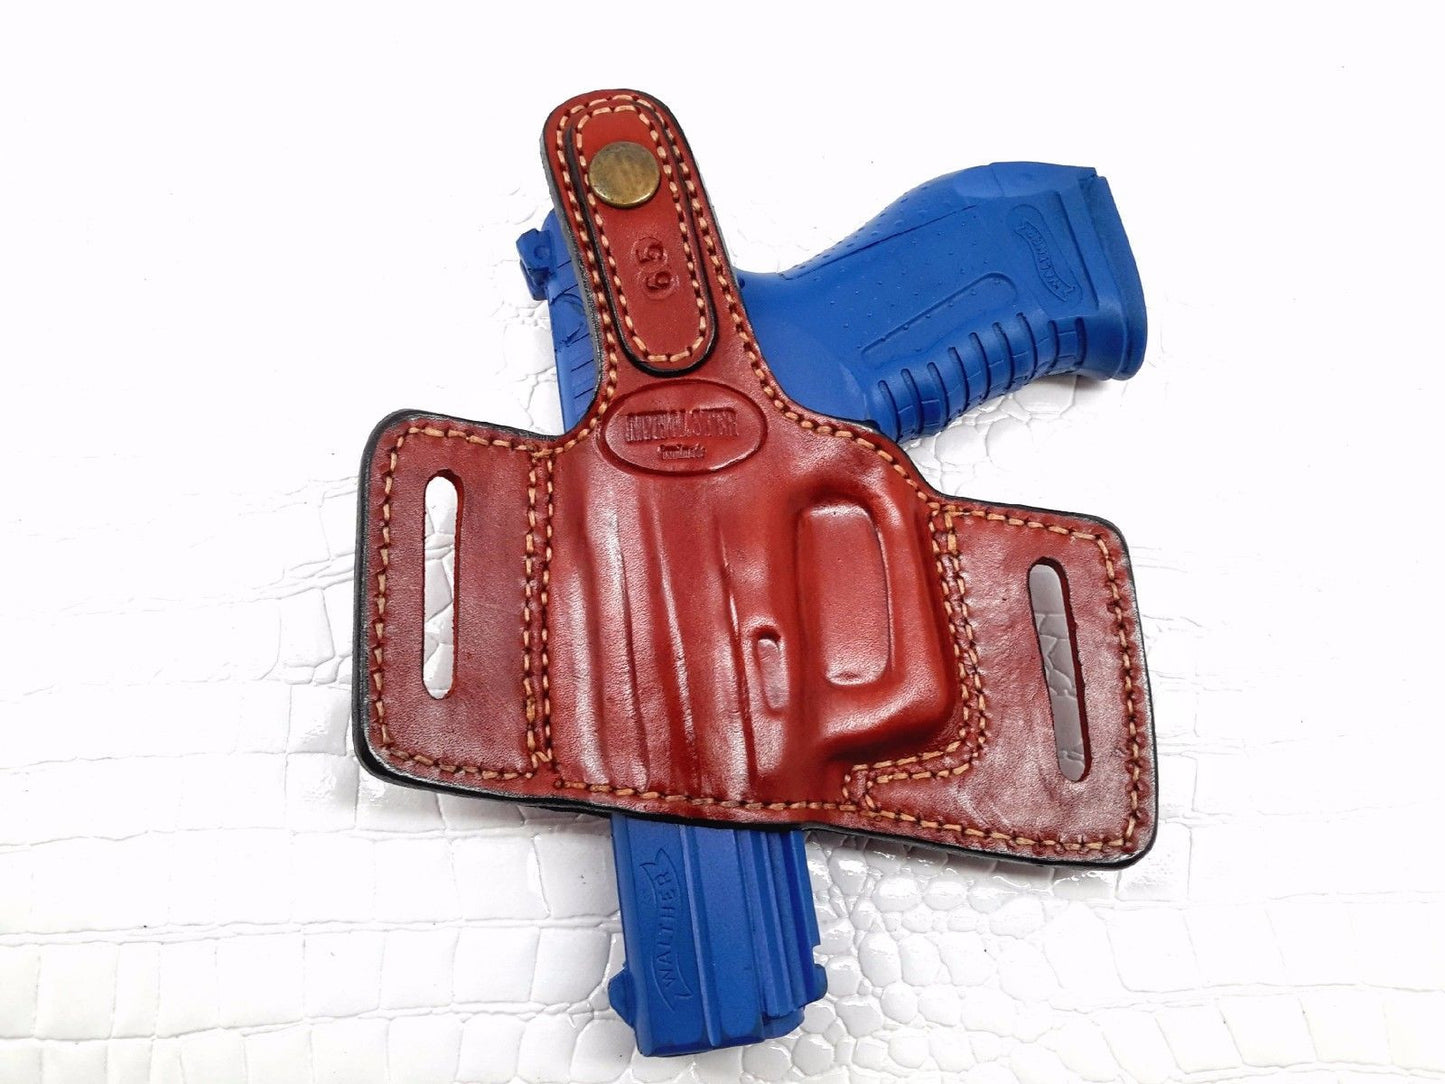 Thumb Break Belt Holster for Walther P99 , MyHolster